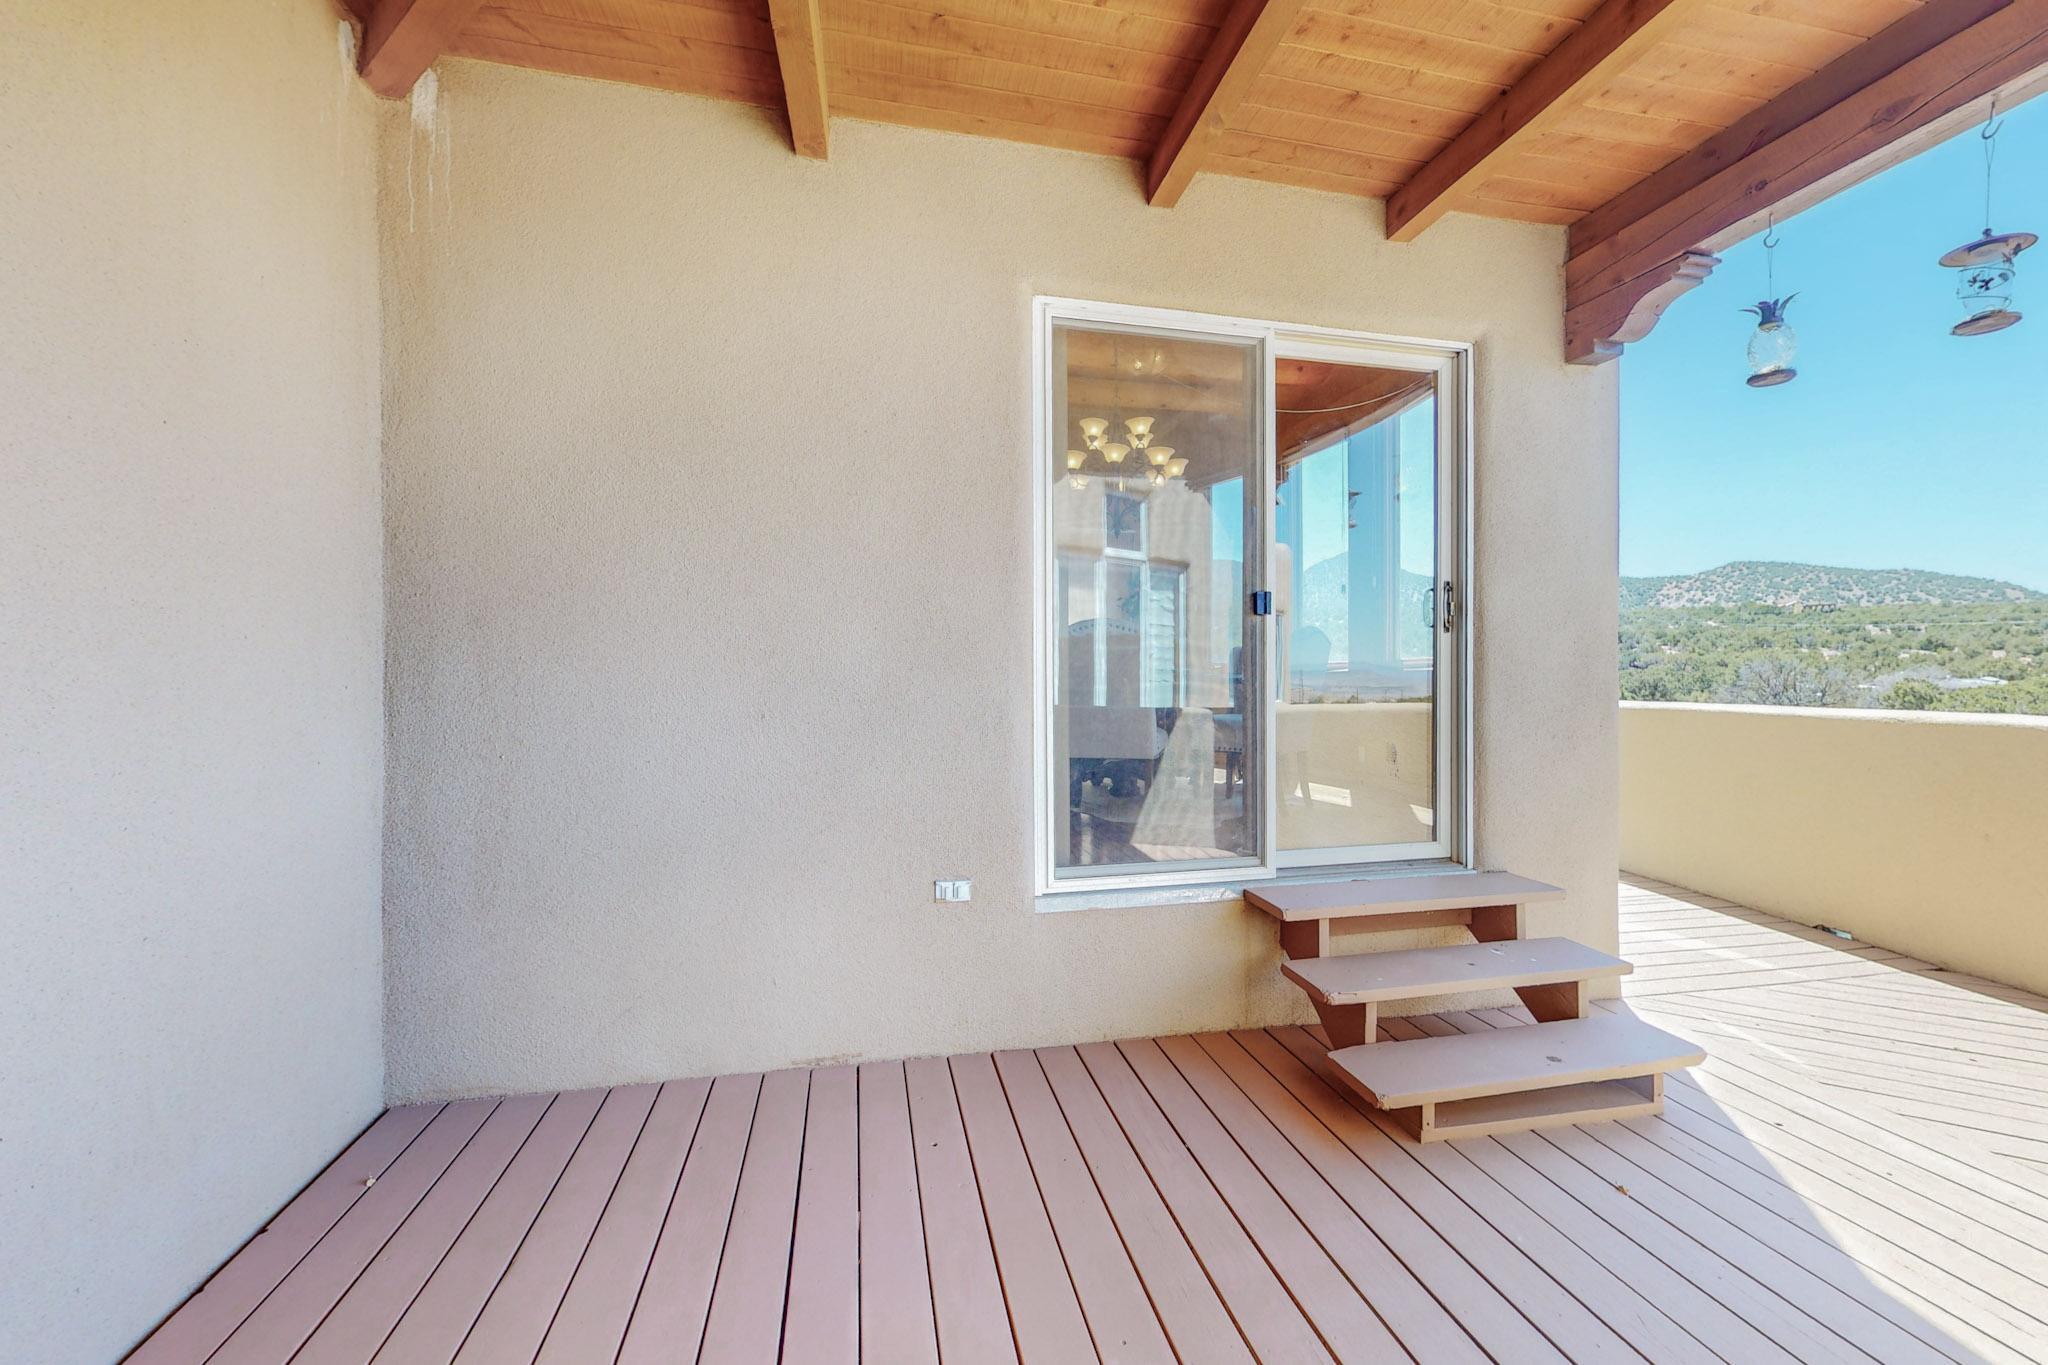 71 Tunnel Springs Road, Placitas, New Mexico 87043, 4 Bedrooms Bedrooms, ,4 BathroomsBathrooms,Residential,For Sale,71 Tunnel Springs Road,1061537